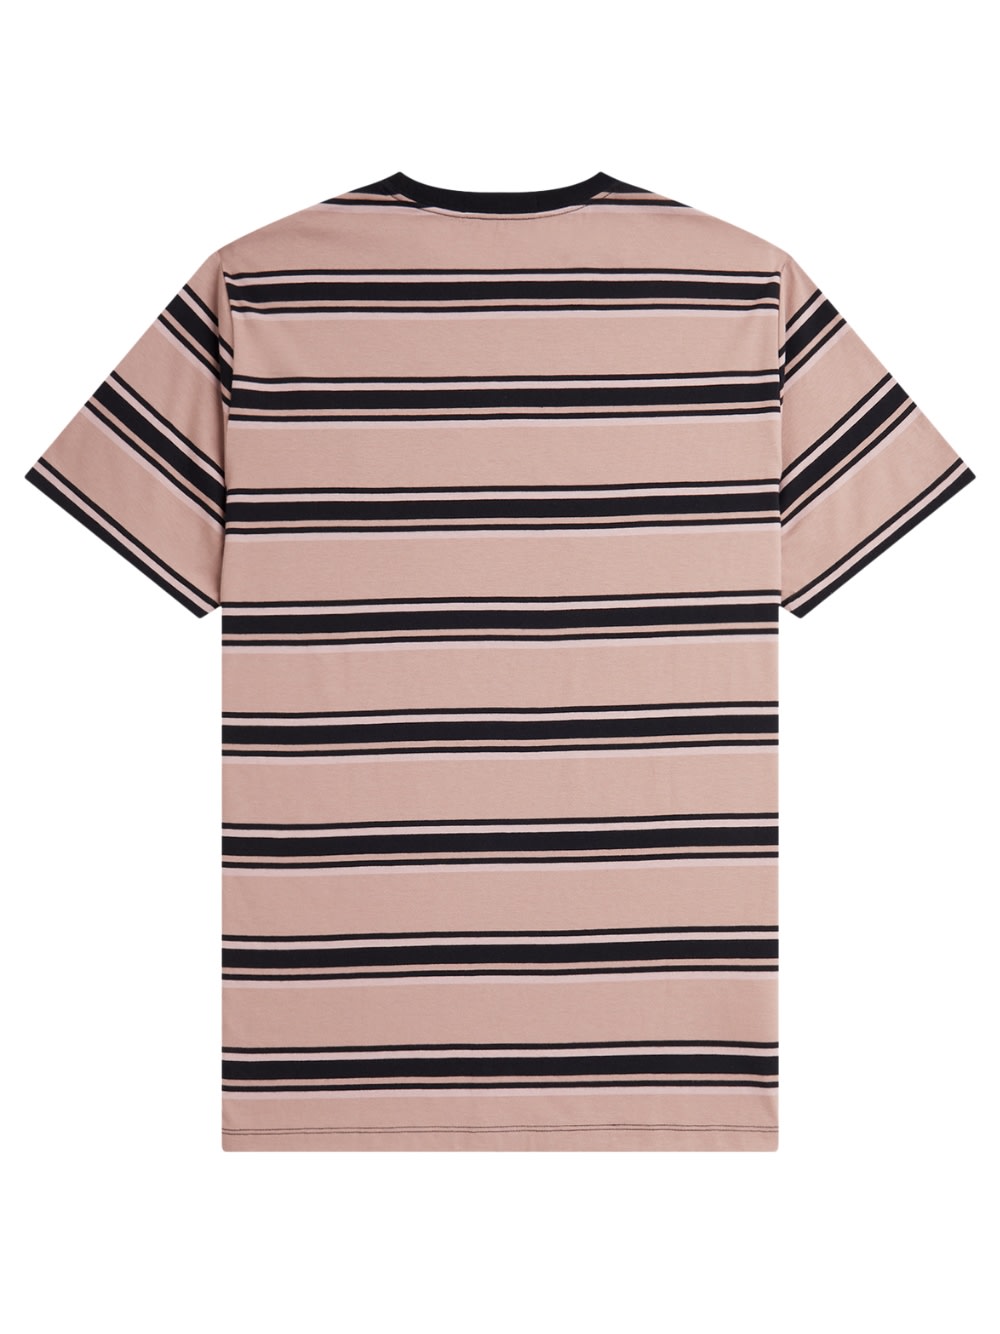 Shop Fred Perry Fp Stripe T-shirt In Dkpink Dustro Bk